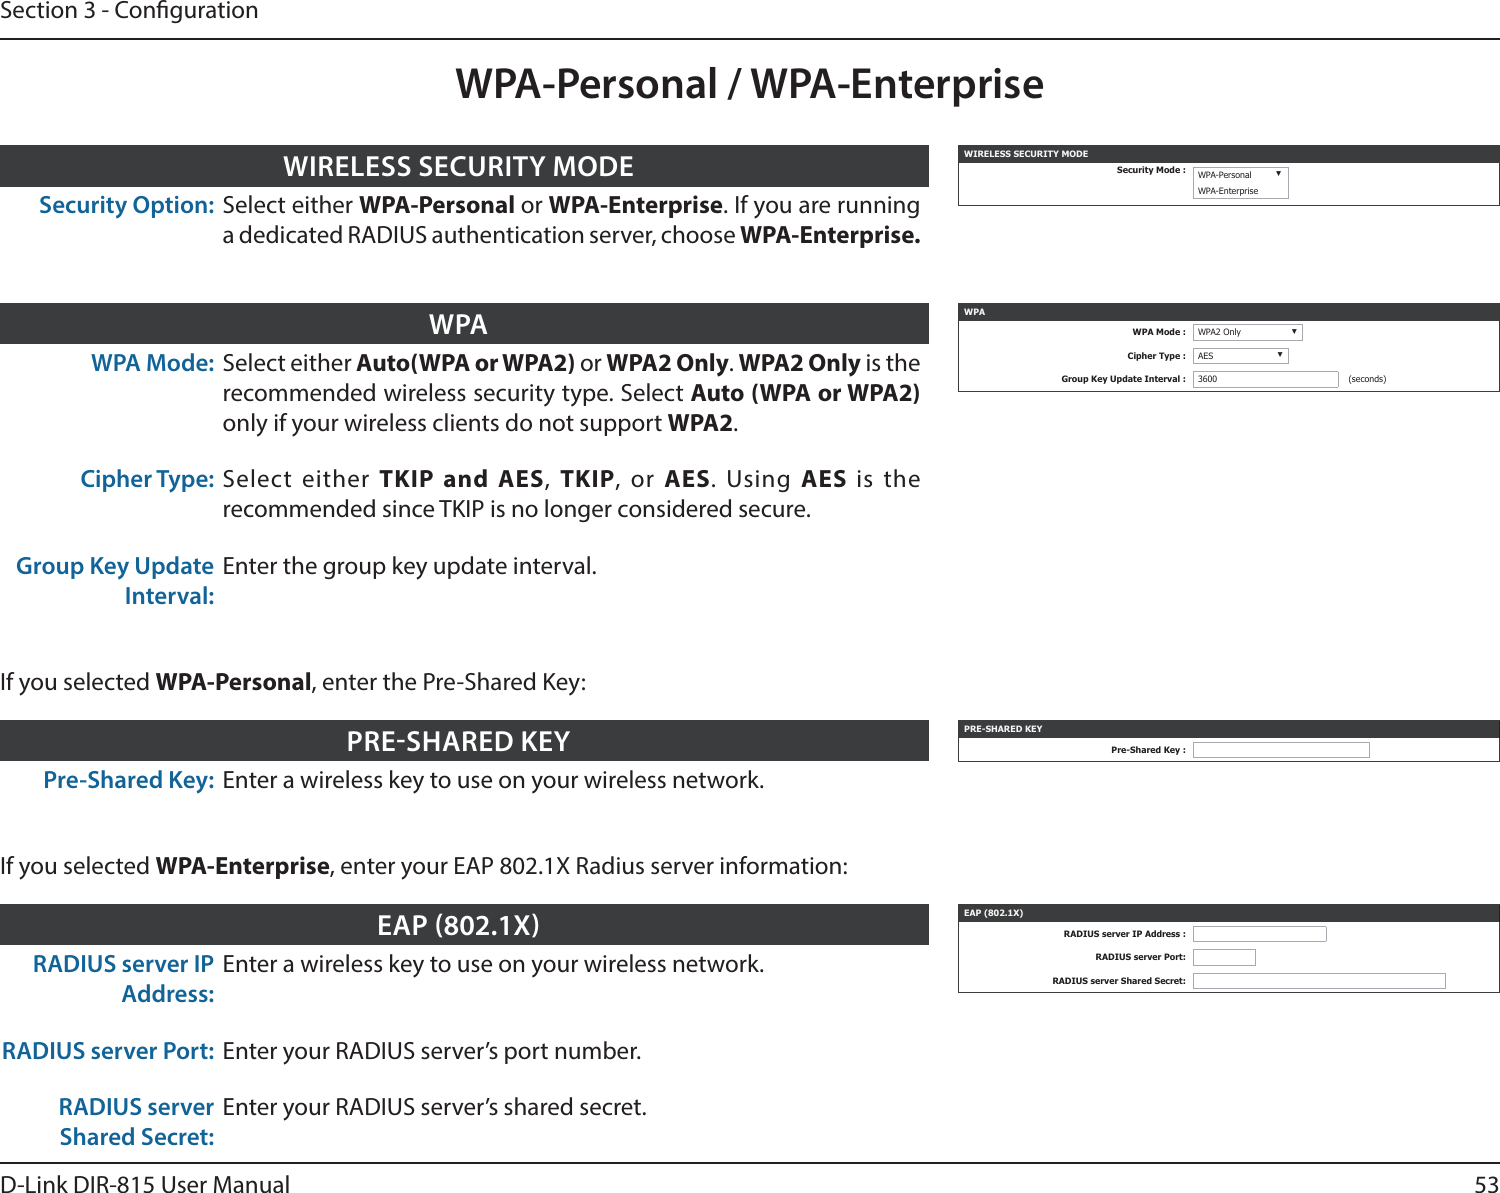 53D-Link DIR-815 User ManualSection 3 - CongurationWPA-Personal / WPA-EnterpriseWPA Mode: Select either Auto(WPA or WPA2) or WPA2 Only. WPA2 Only is the recommended wireless security type. Select Auto (WPA or WPA2) only if your wireless clients do not support WPA2.Cipher Type: Select either TKIP and AES,  TKIP, or AES. Using AES  is the recommended since TKIP is no longer considered secure. Group Key Update Interval:Enter the group key update interval.WPA WPAWPA Mode : WPA2 Only ▼Cipher Type : AES ▼Group Key Update Interval : 3600 (seconds)Pre-Shared Key: Enter a wireless key to use on your wireless network.PRESHARED KEY PRE-SHARED KEYPre-Shared Key :If you selected WPA-Personal, enter the Pre-Shared Key:RADIUS server IP Address:Enter a wireless key to use on your wireless network.RADIUS server Port: Enter your RADIUS server’s port number.RADIUS server Shared Secret:Enter your RADIUS server’s shared secret.EAP 802.1X EAP (802.1X)RADIUS server IP Address :RADIUS server Port:RADIUS server Shared Secret:If you selected WPA-Enterprise, enter your EAP 802.1X Radius server information:Security Option: Select either WPA-Personal or WPA-Enterprise. If you are running a dedicated RADIUS authentication server, choose WPA-Enterprise.WIRELESS SECURITY MODE WIRELESS SECURITY MODESecurity Mode : WPA-Personal ▼WPA-Enterprise